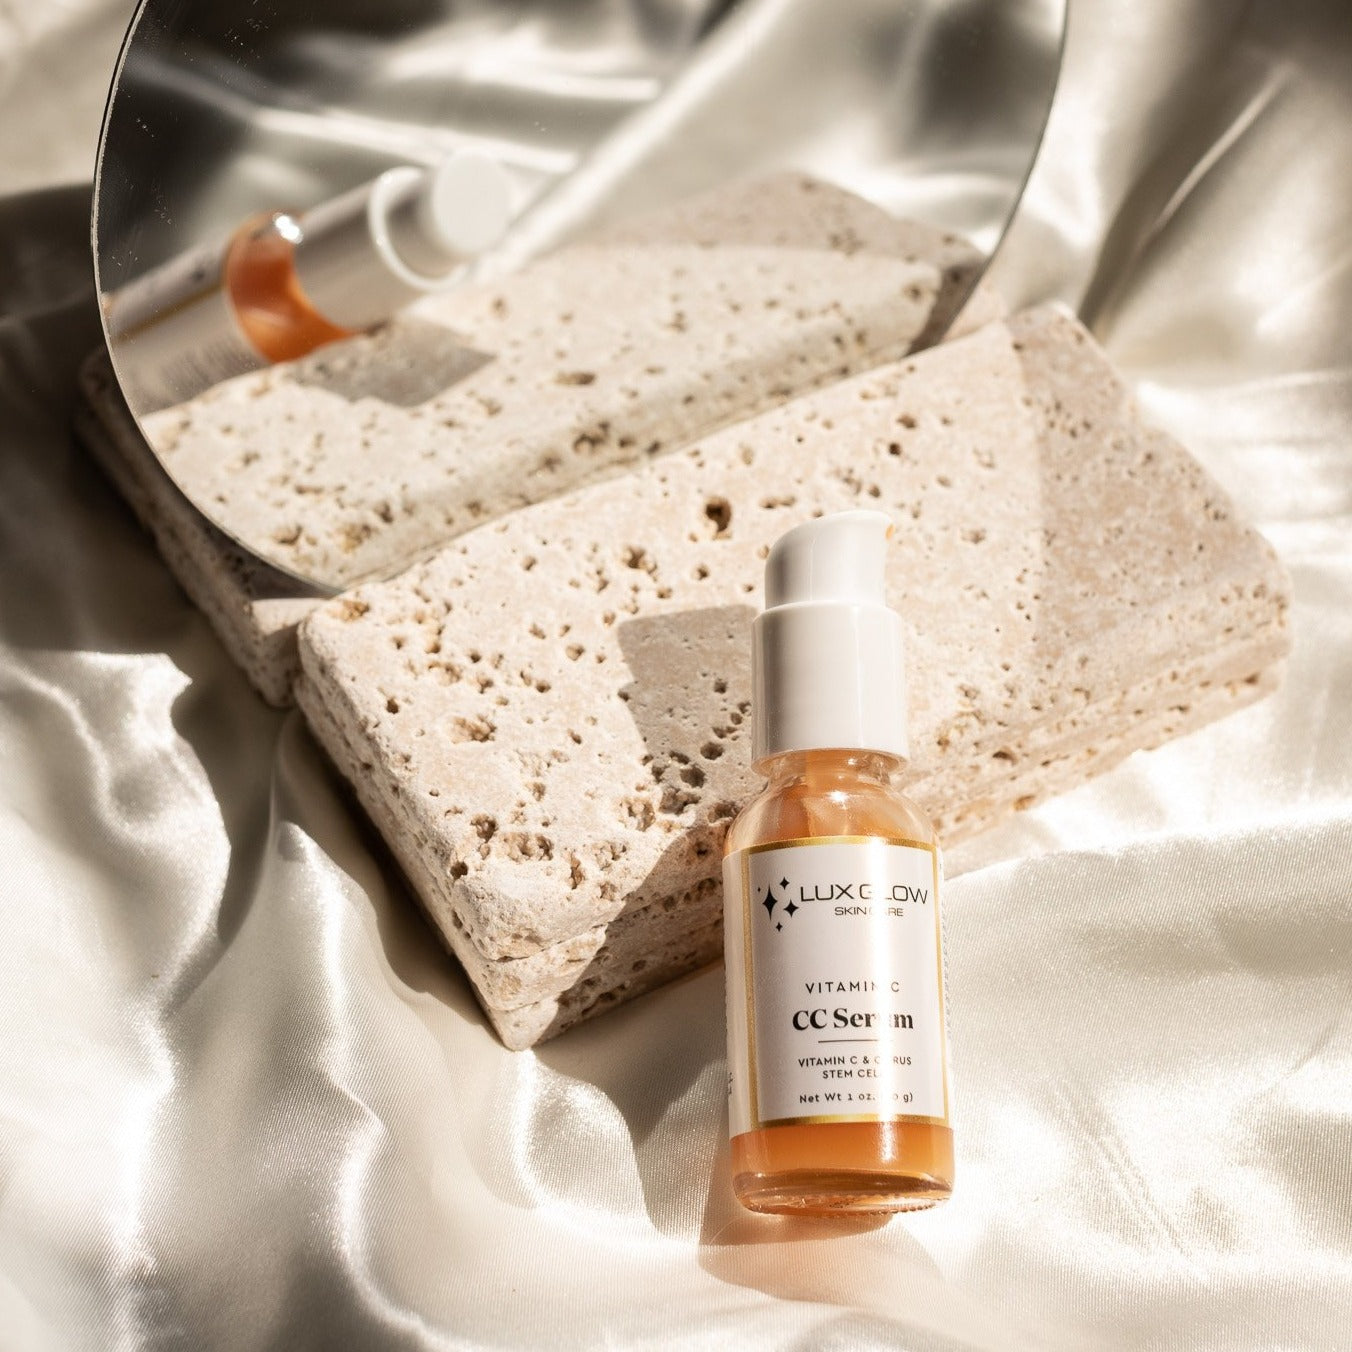 The citrus scented serum reduces the appearance of fine lines and wrinkles, hydrates the skin to visibly improve firmness, and reduce the appearance of discoloration while evening skin tone. The vitamins protect and preserve the appearance of beautiful, vibrant-looking skin, while enhancing the skins elasticity with the Citrus Stem Cells from oranges. This serum will help reduce the appearance of age spots, blemishes and redness. Made in USA.